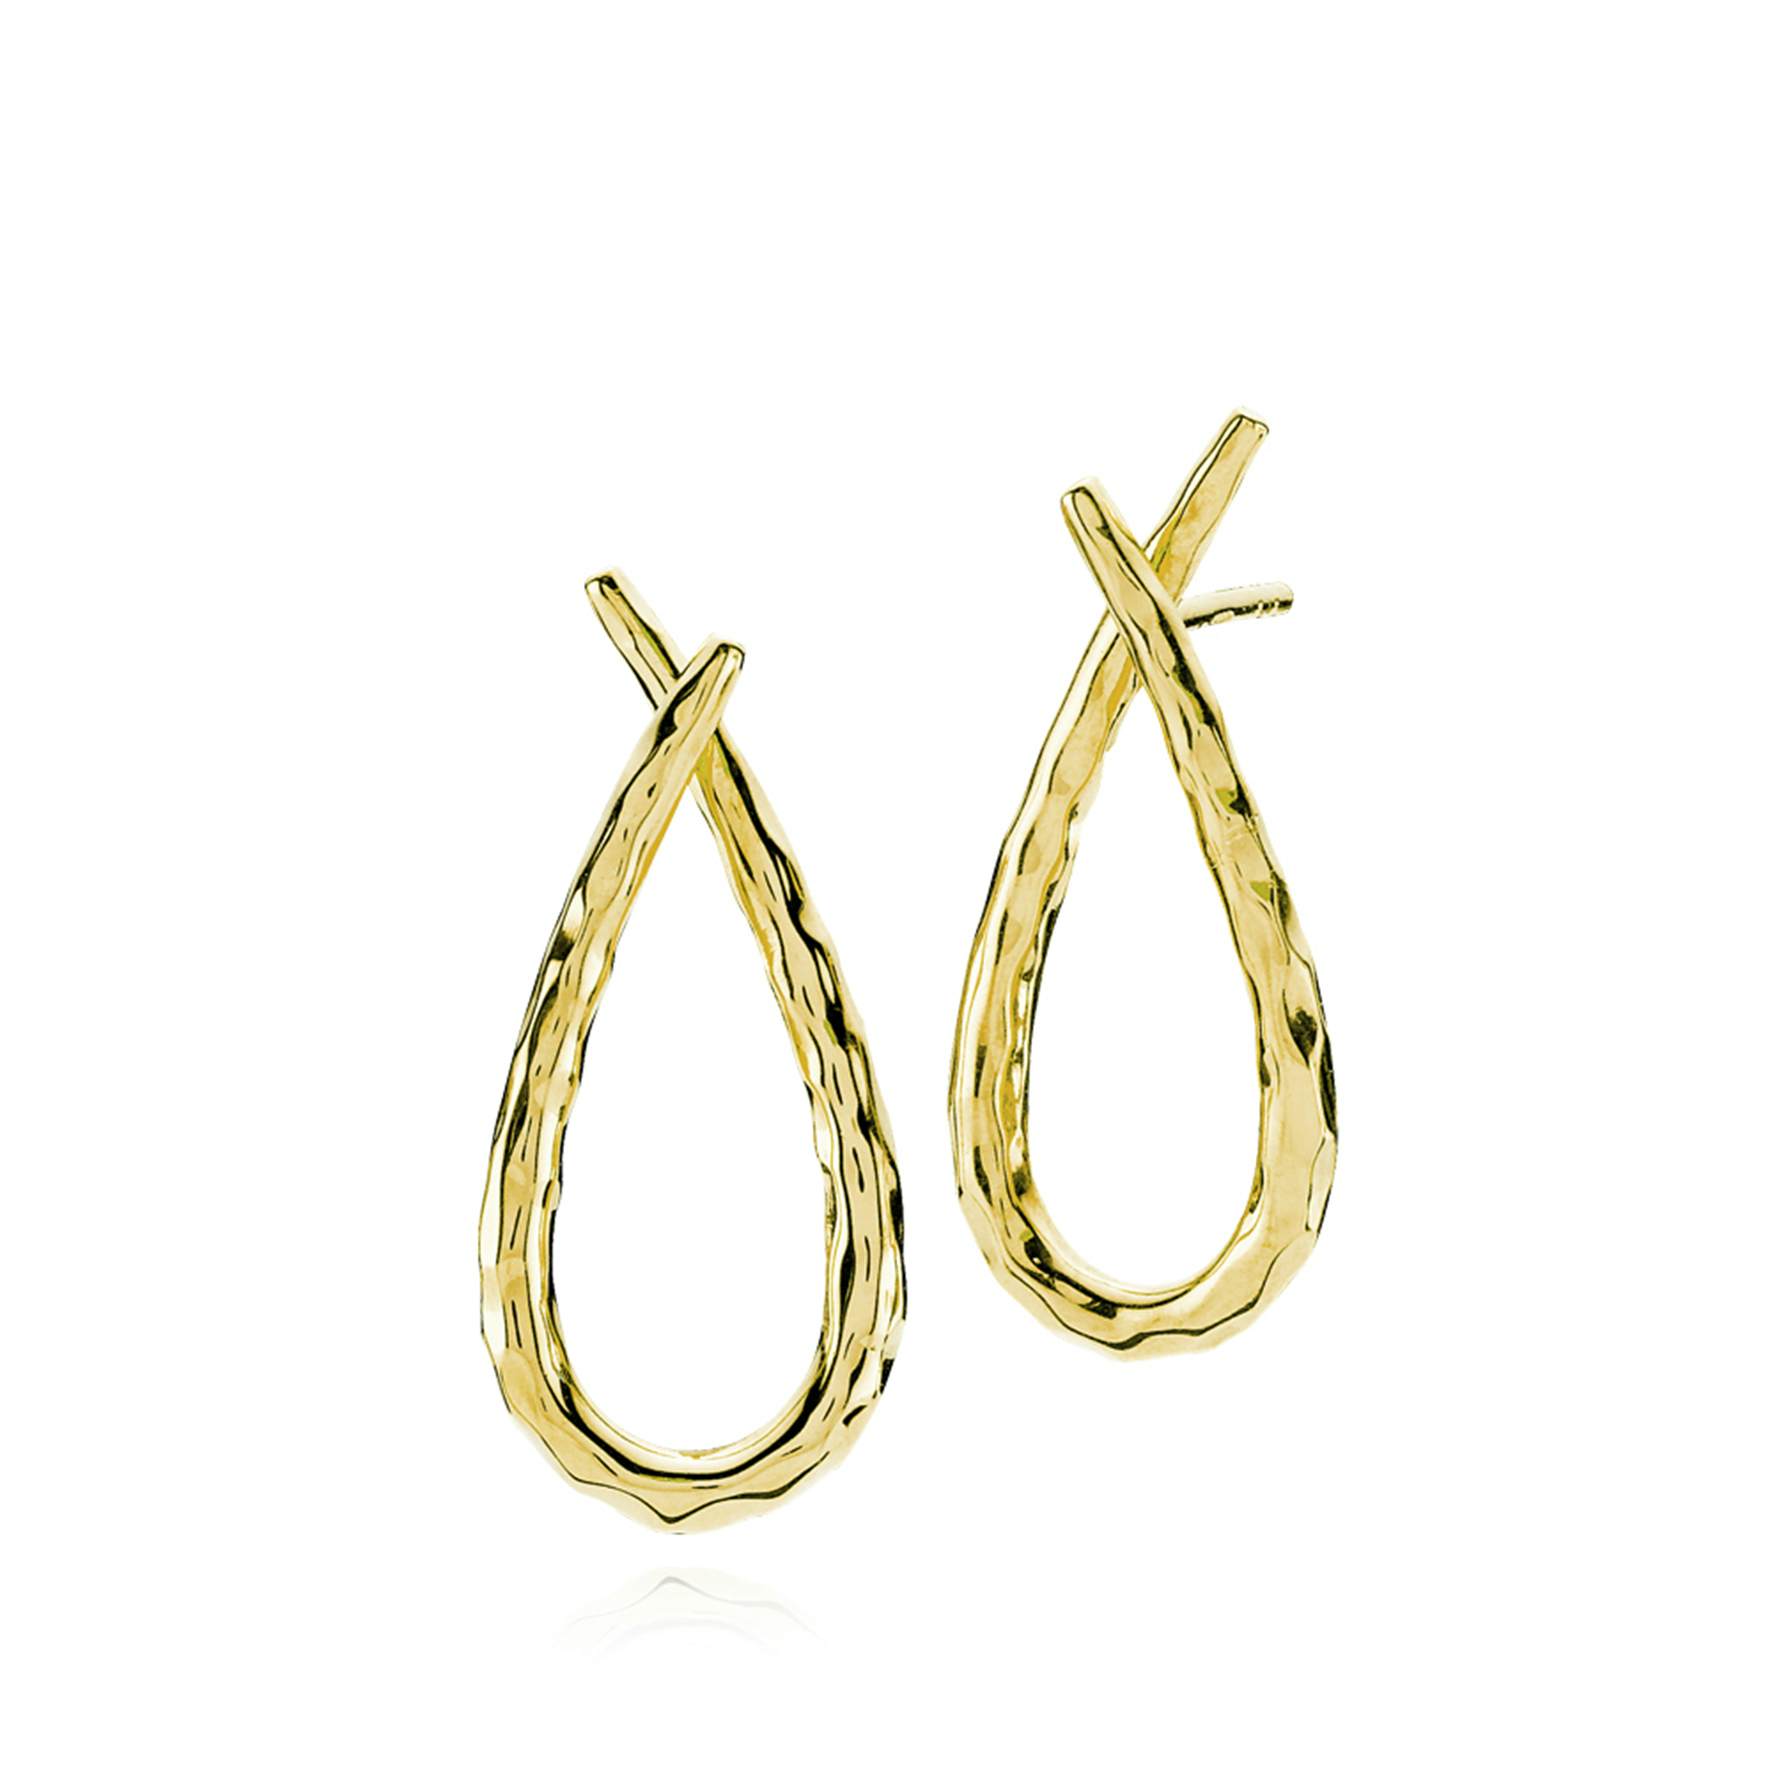 Attitude Hammered Earrings from Izabel Camille in Goldplated-Silver Sterling 925